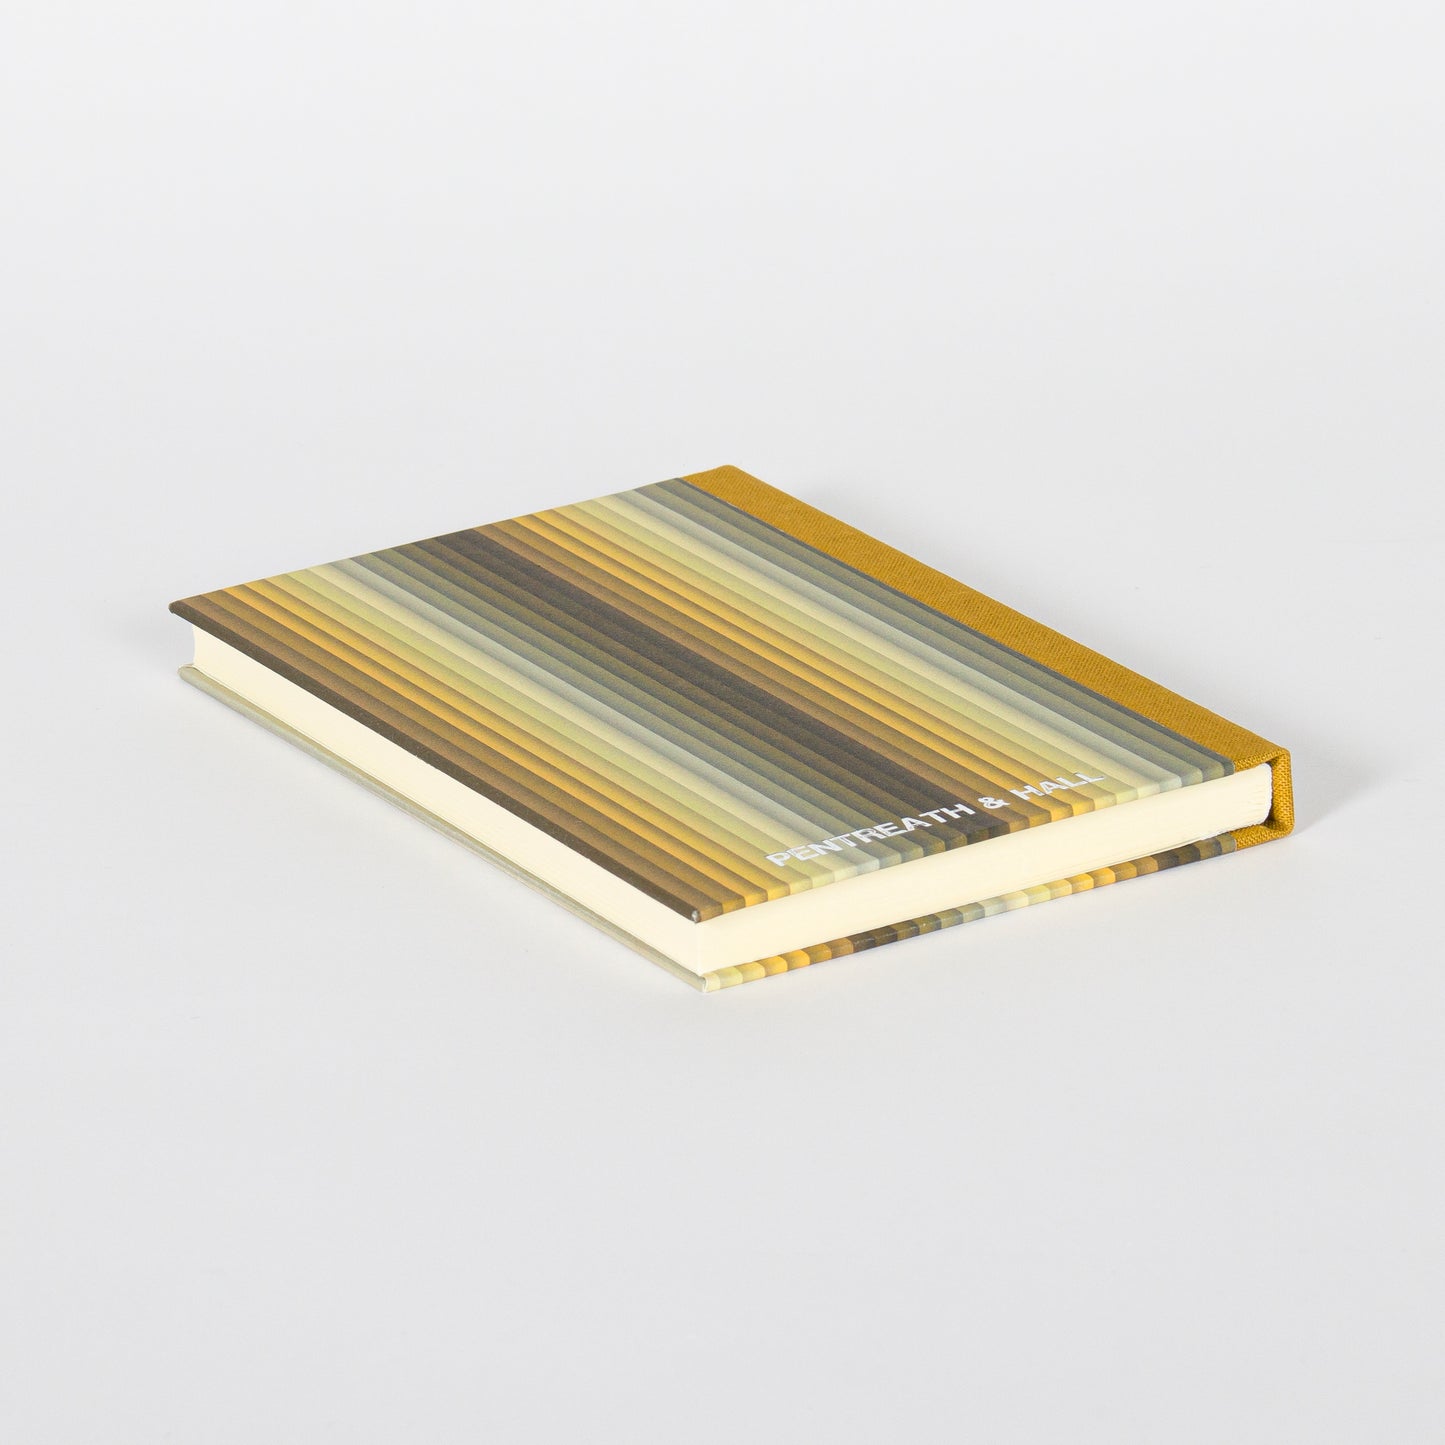 A6 Hardcover Notebook - Yellow Undulating Stripes